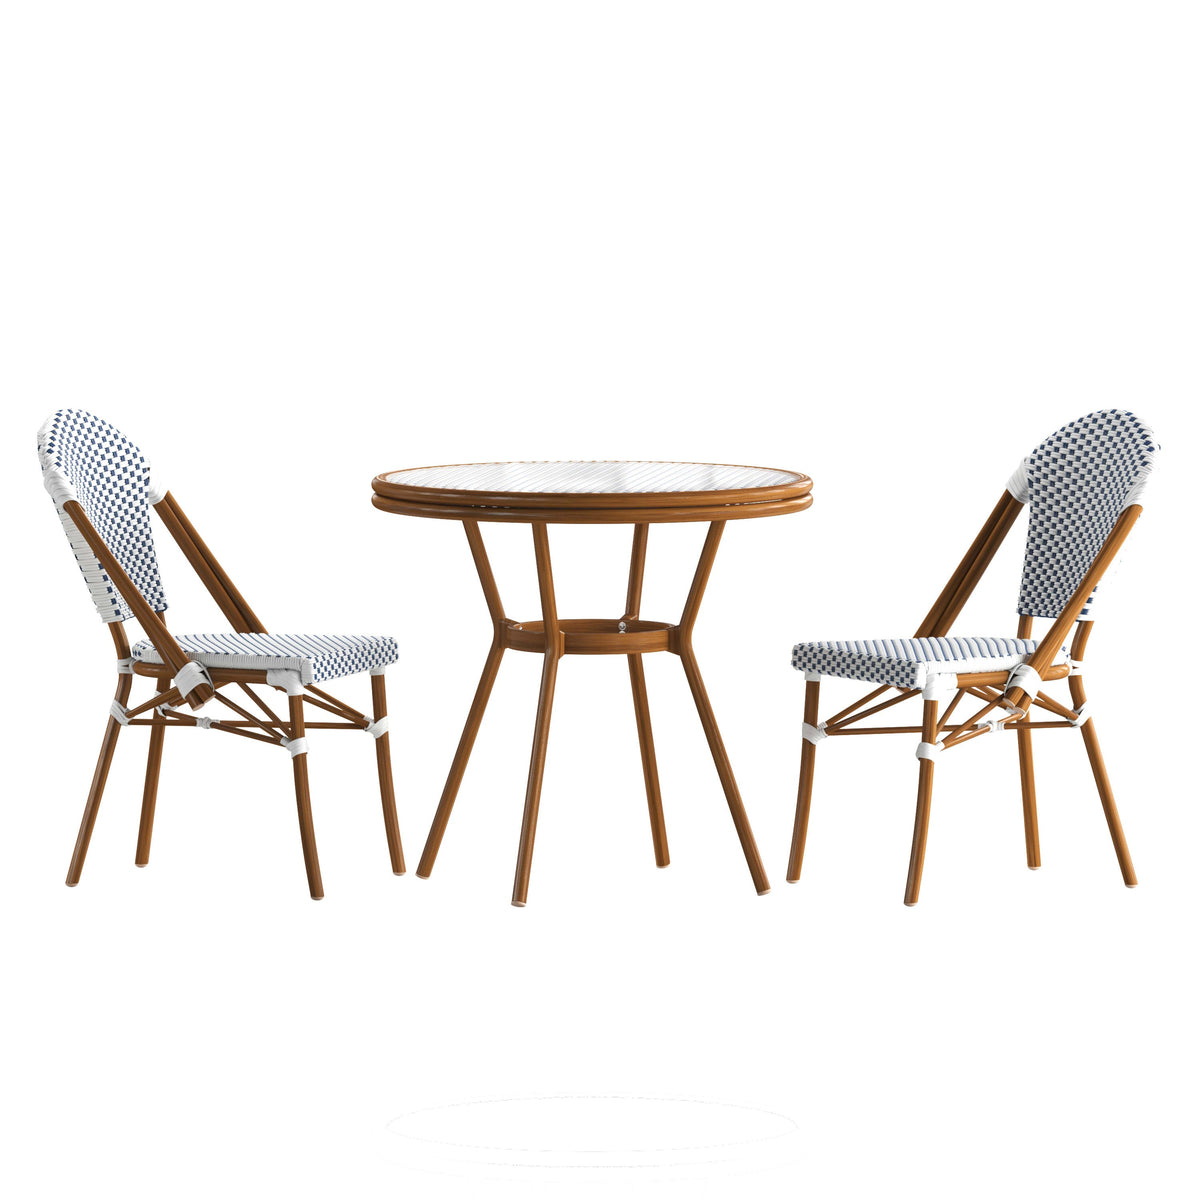 White & Navy Rattan/Natural Frame |#| Indoor/Outdoor Commercial French Bistro Set with Table and 2 Chairs in Wht/Navy